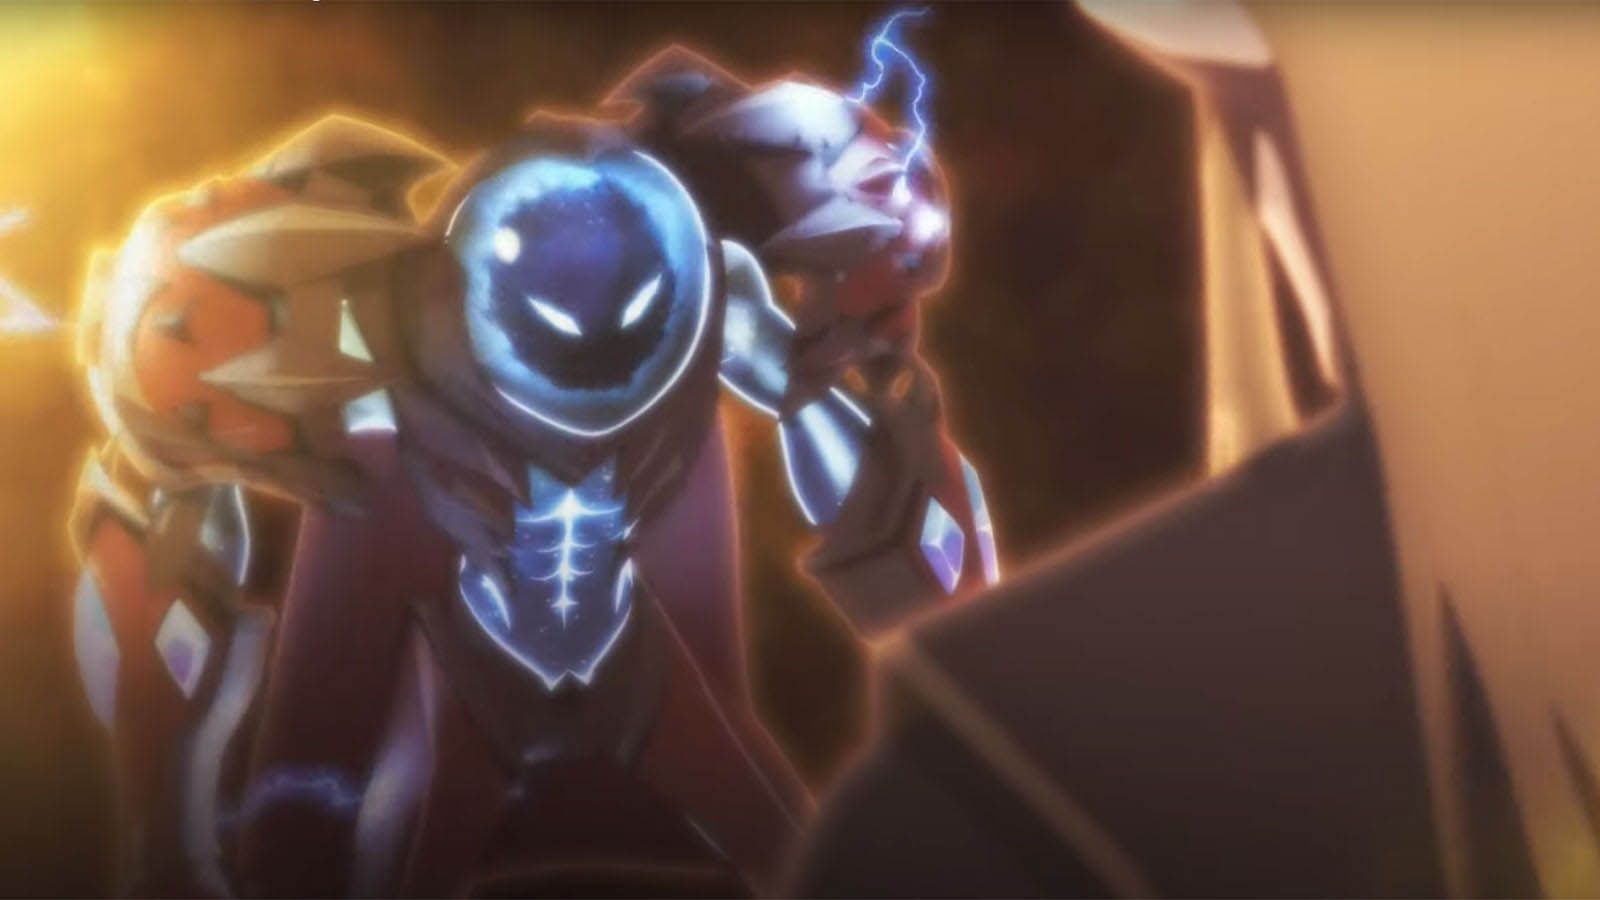 The Dota Anime Starts Streaming This Week - Here's Where To Watch